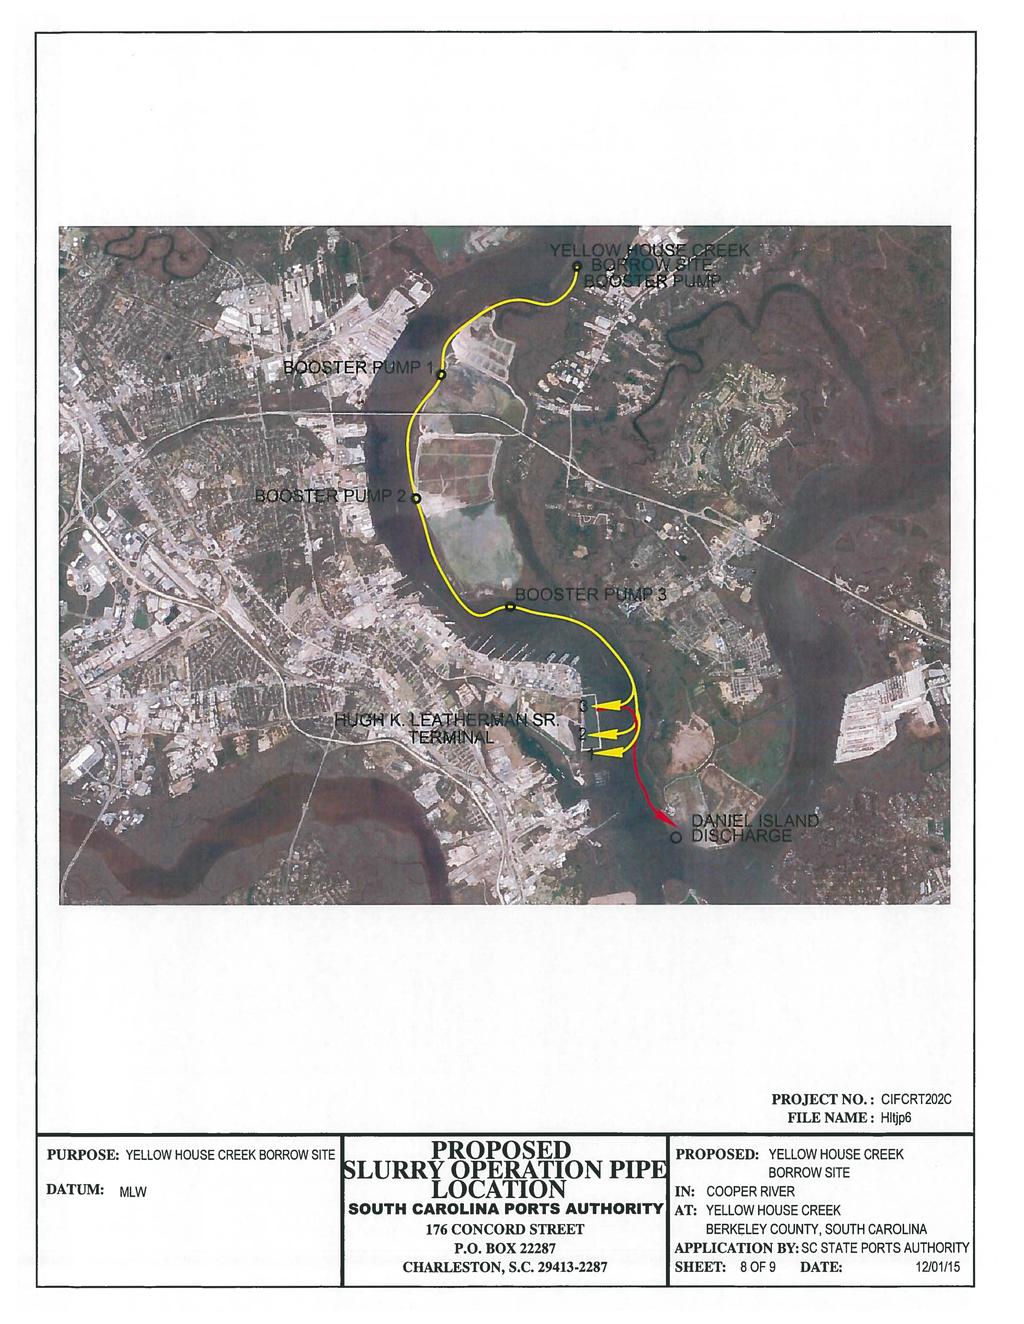 PURPOSE: YELLOW HOUSE CREEK BORROW SITE DATUM: MLW PROPOSED LURRY OPERATION PIP LOCATION PROJECT NO.